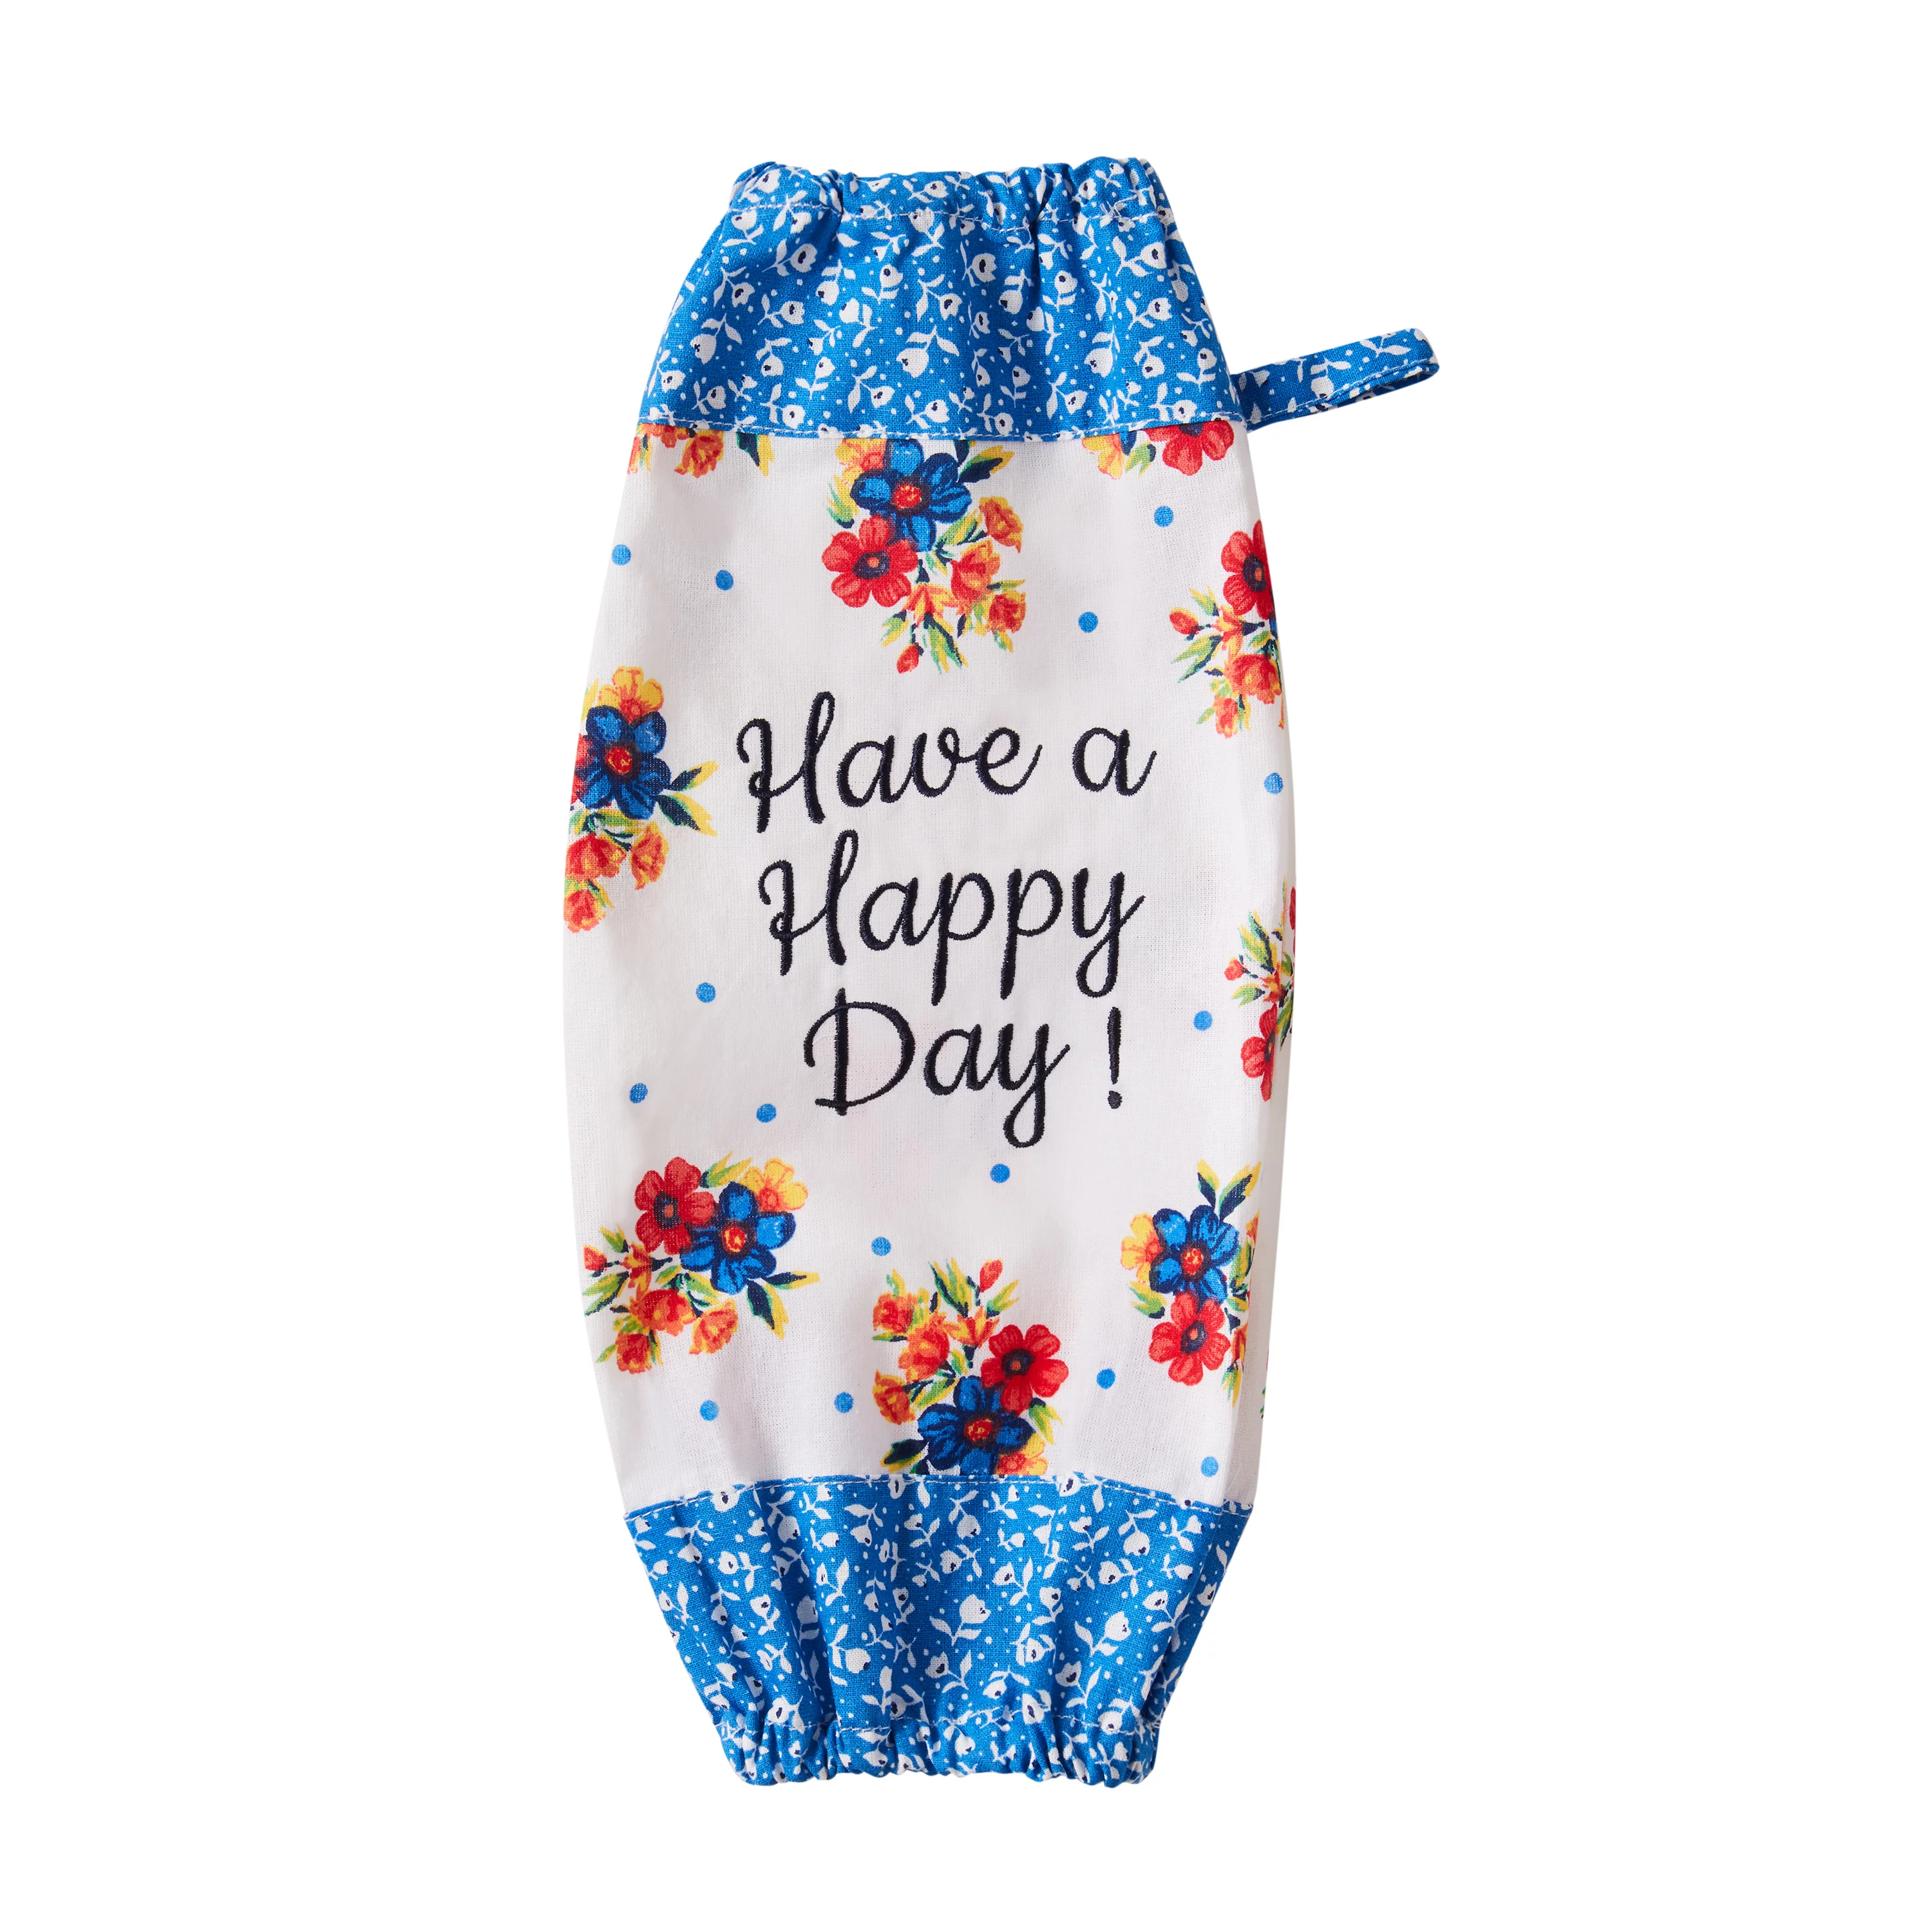 The Pioneer Woman Happy Day Bag Saver